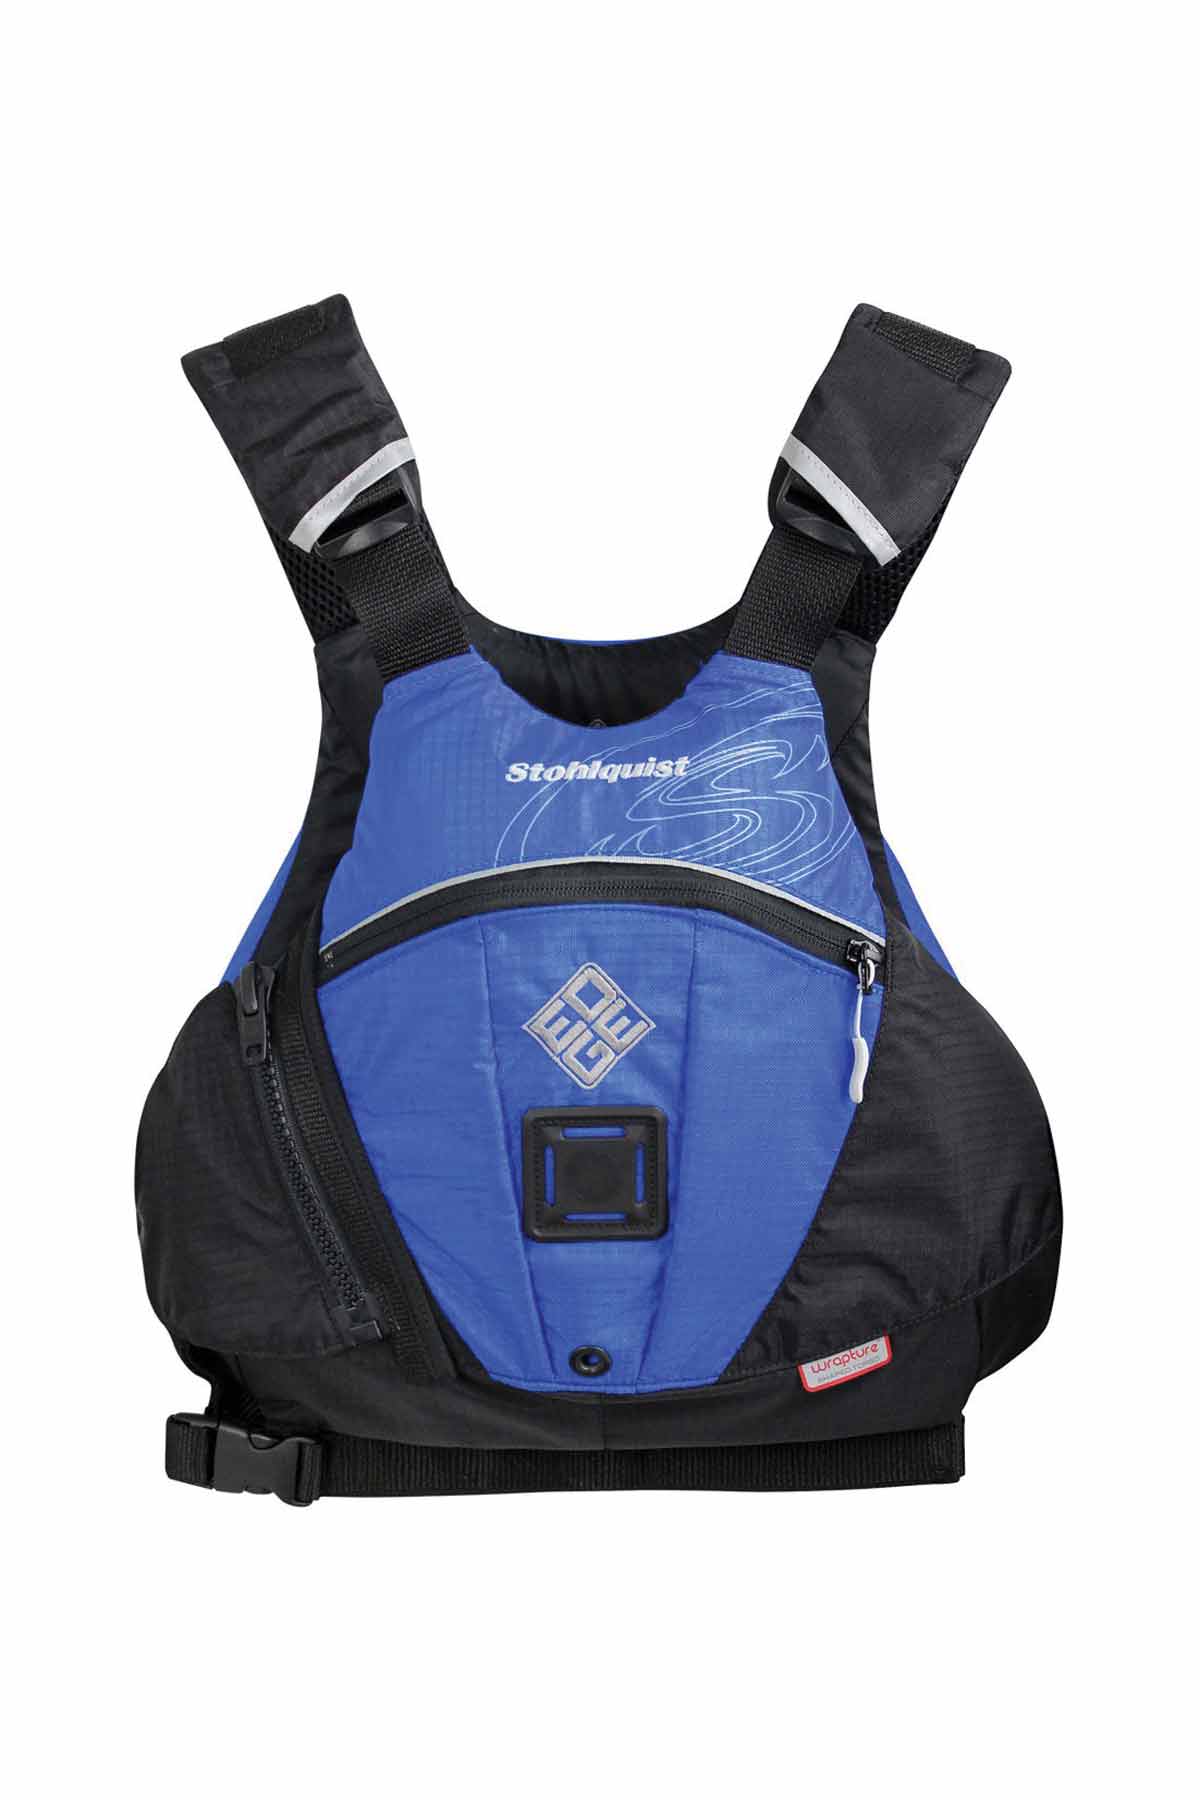 Stohlquist Edge Whitewater PFD Front Blue